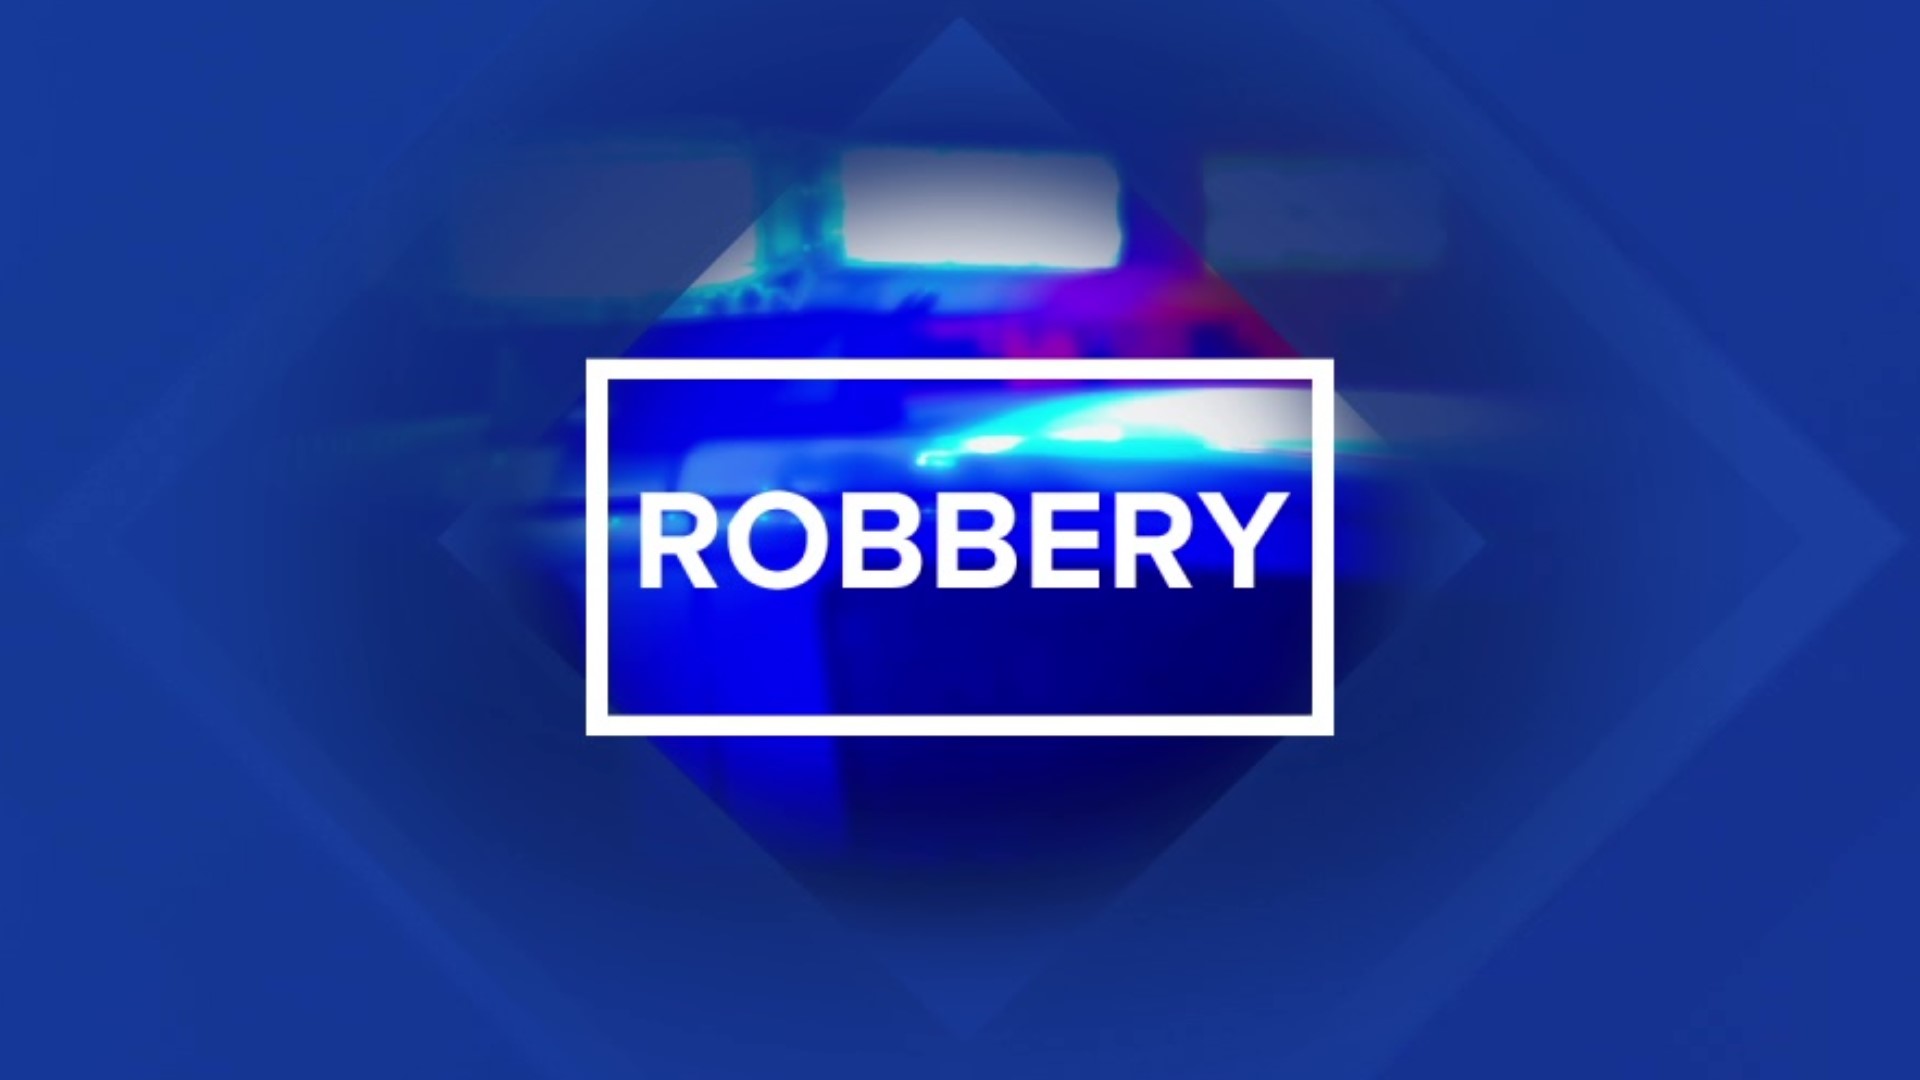 The armed robbery happened on Friday night.